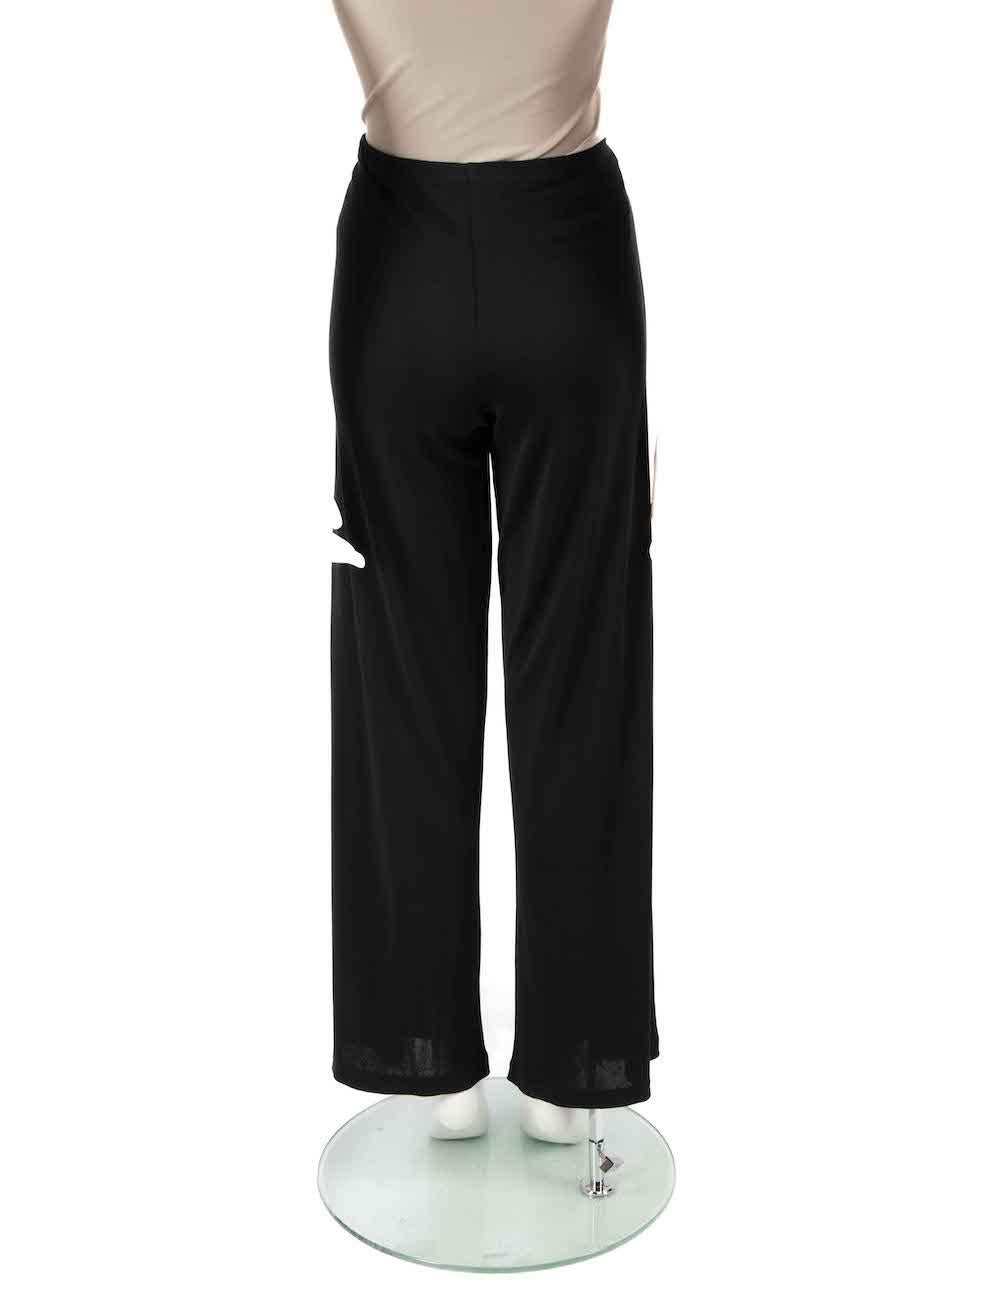 La Perla Black Wide Fit Trousers Size XL In Good Condition For Sale In London, GB